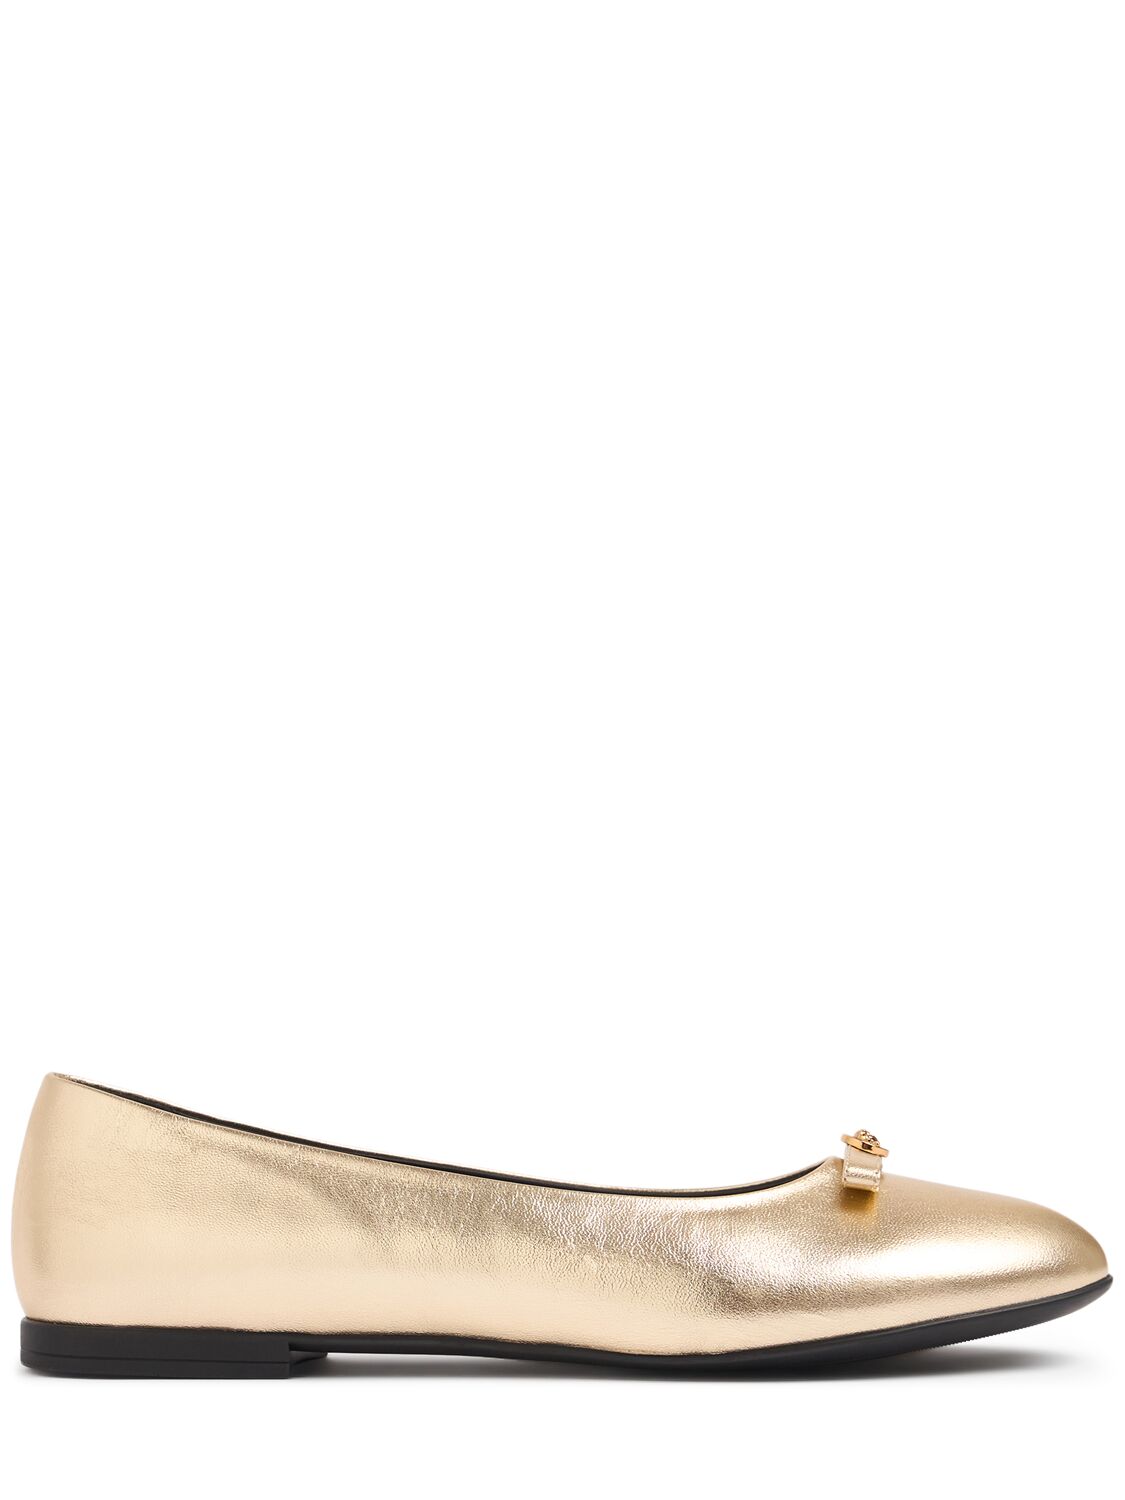 Versace Metallic Leather Ballerinas W/bow In Gold